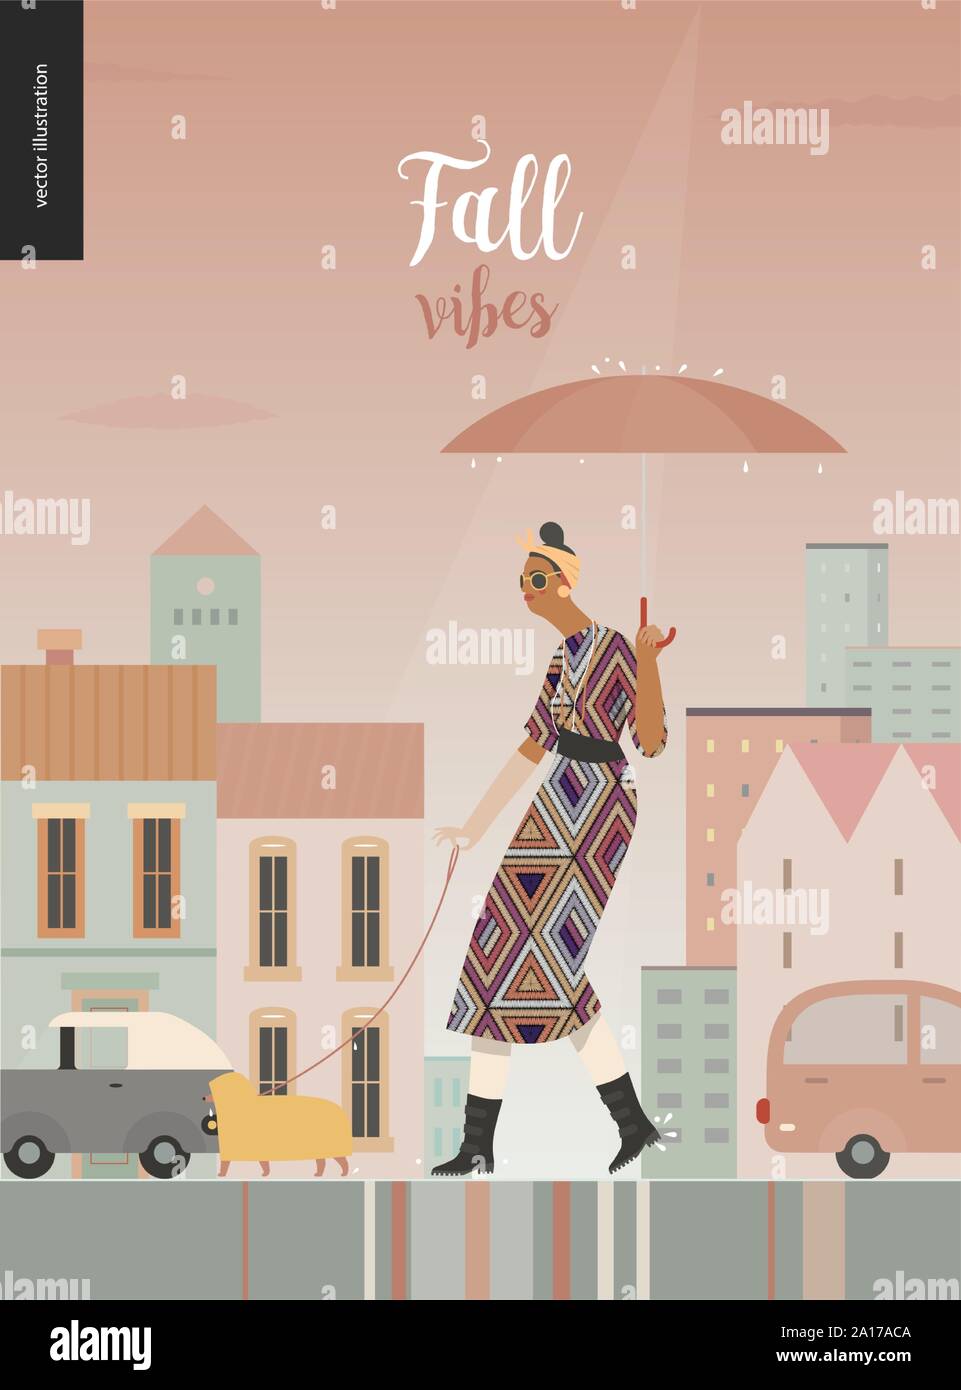 Rain -walking woman with a dog -modern flat vector concept illustration of a woman with umbrella, walking in the rain in the street with a dog wearing Stock Vector